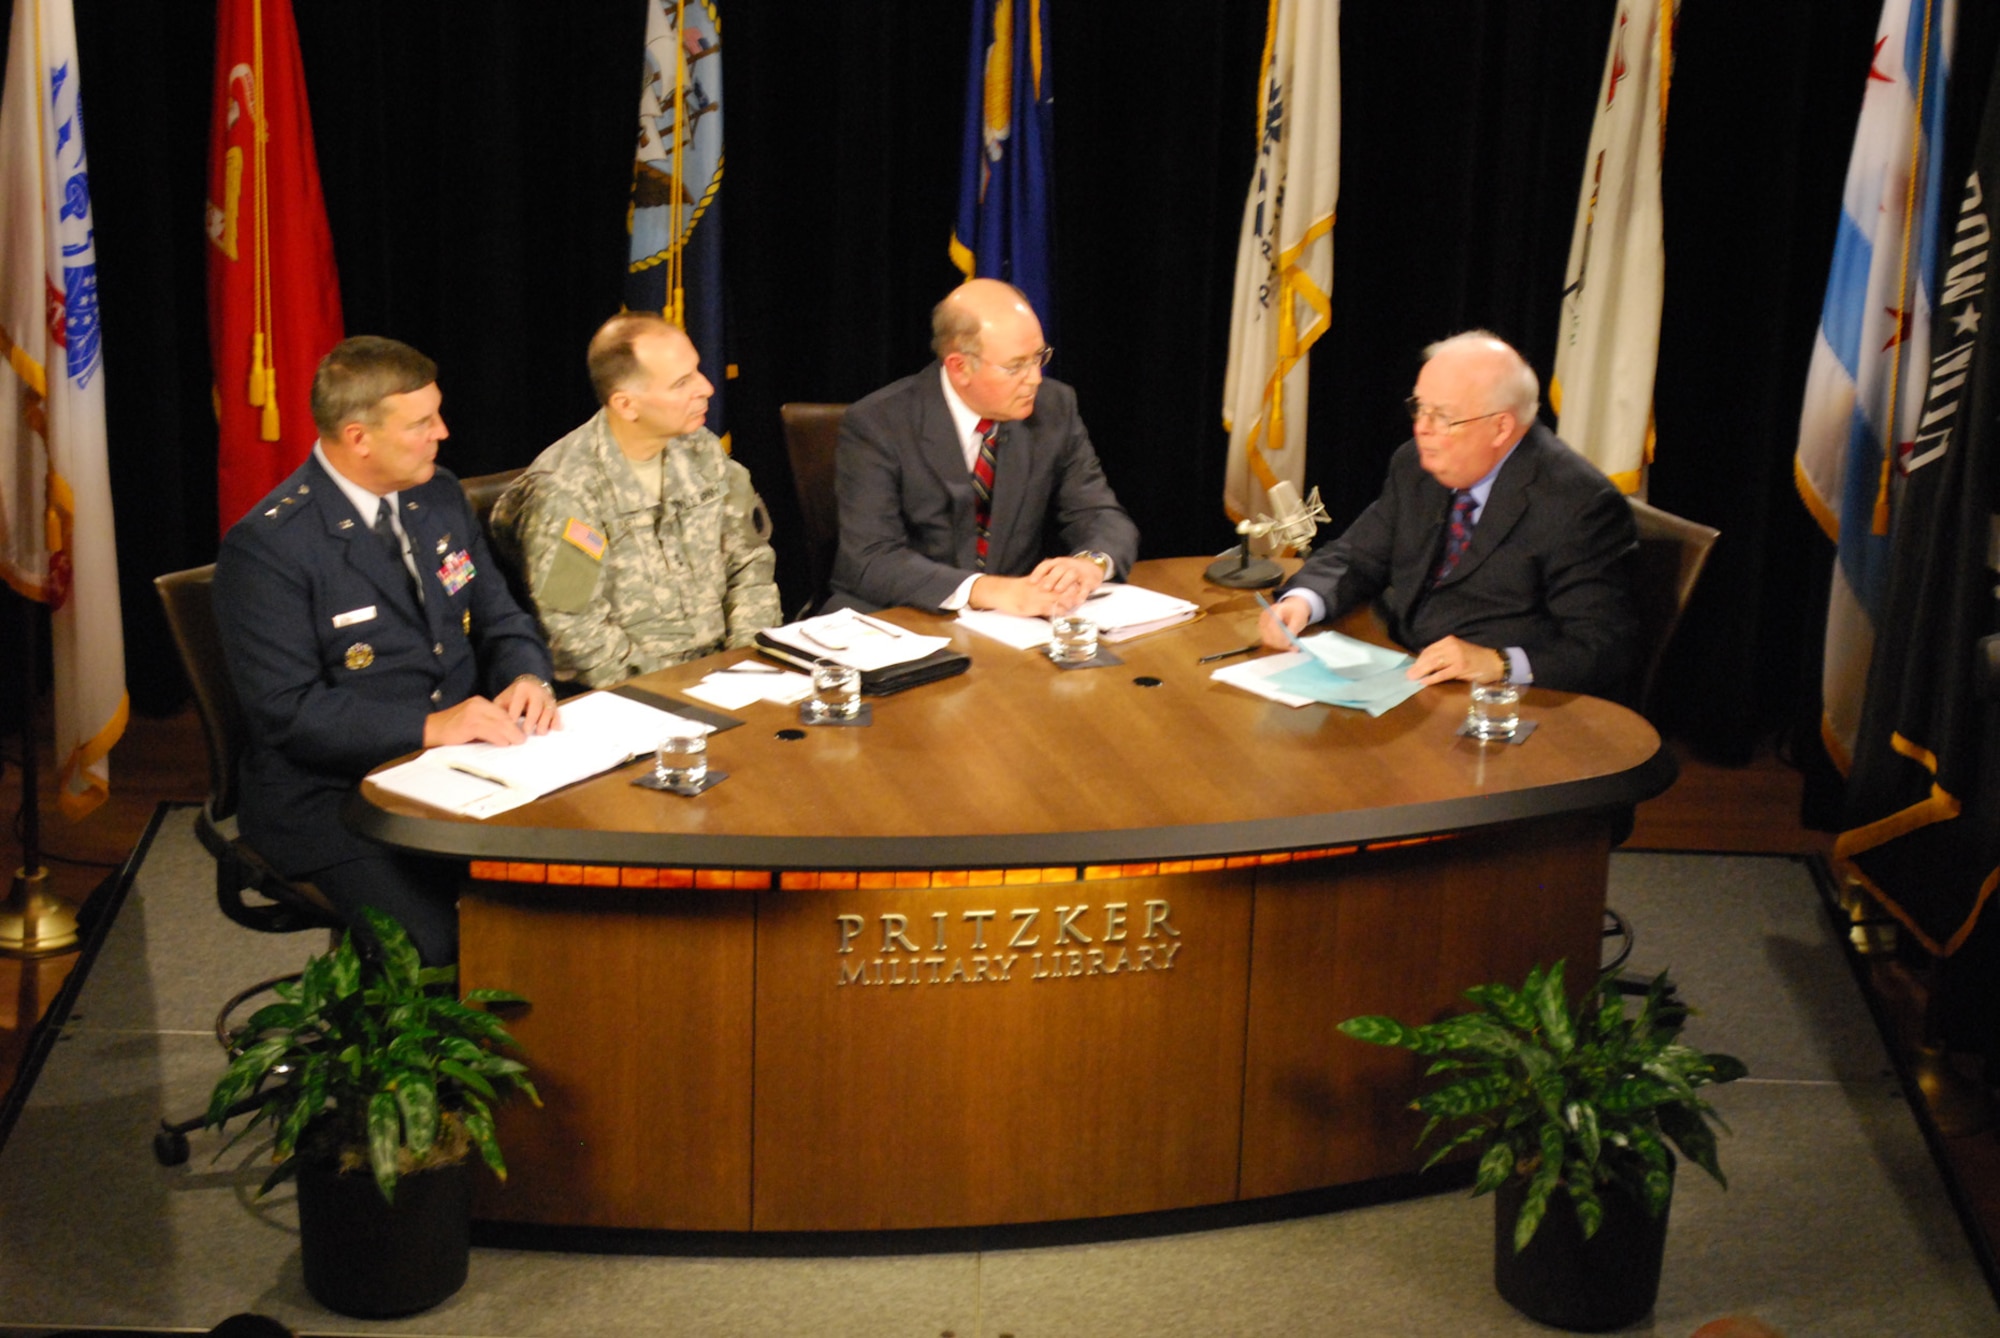 Major General Robert Duignan, Commander, 4th Air Force, participates in a panel discussion provoding and update on Reserve and Guard forces with Major General (IL) William L. Enyart, 37th Adjutant General of the State of Illinois, Dr. John D. Winkler, Principal Deputy Assistant Secretary of Defense for Reserve Affairs and moderator John Callaway.  The panel was part of "Front and Center" a world-wide webcast and locally televised military public affairs program produced by the Pritzker Military Library in Chicago. (U.S. Air Force photo/Senior Airman Zach Anderson)